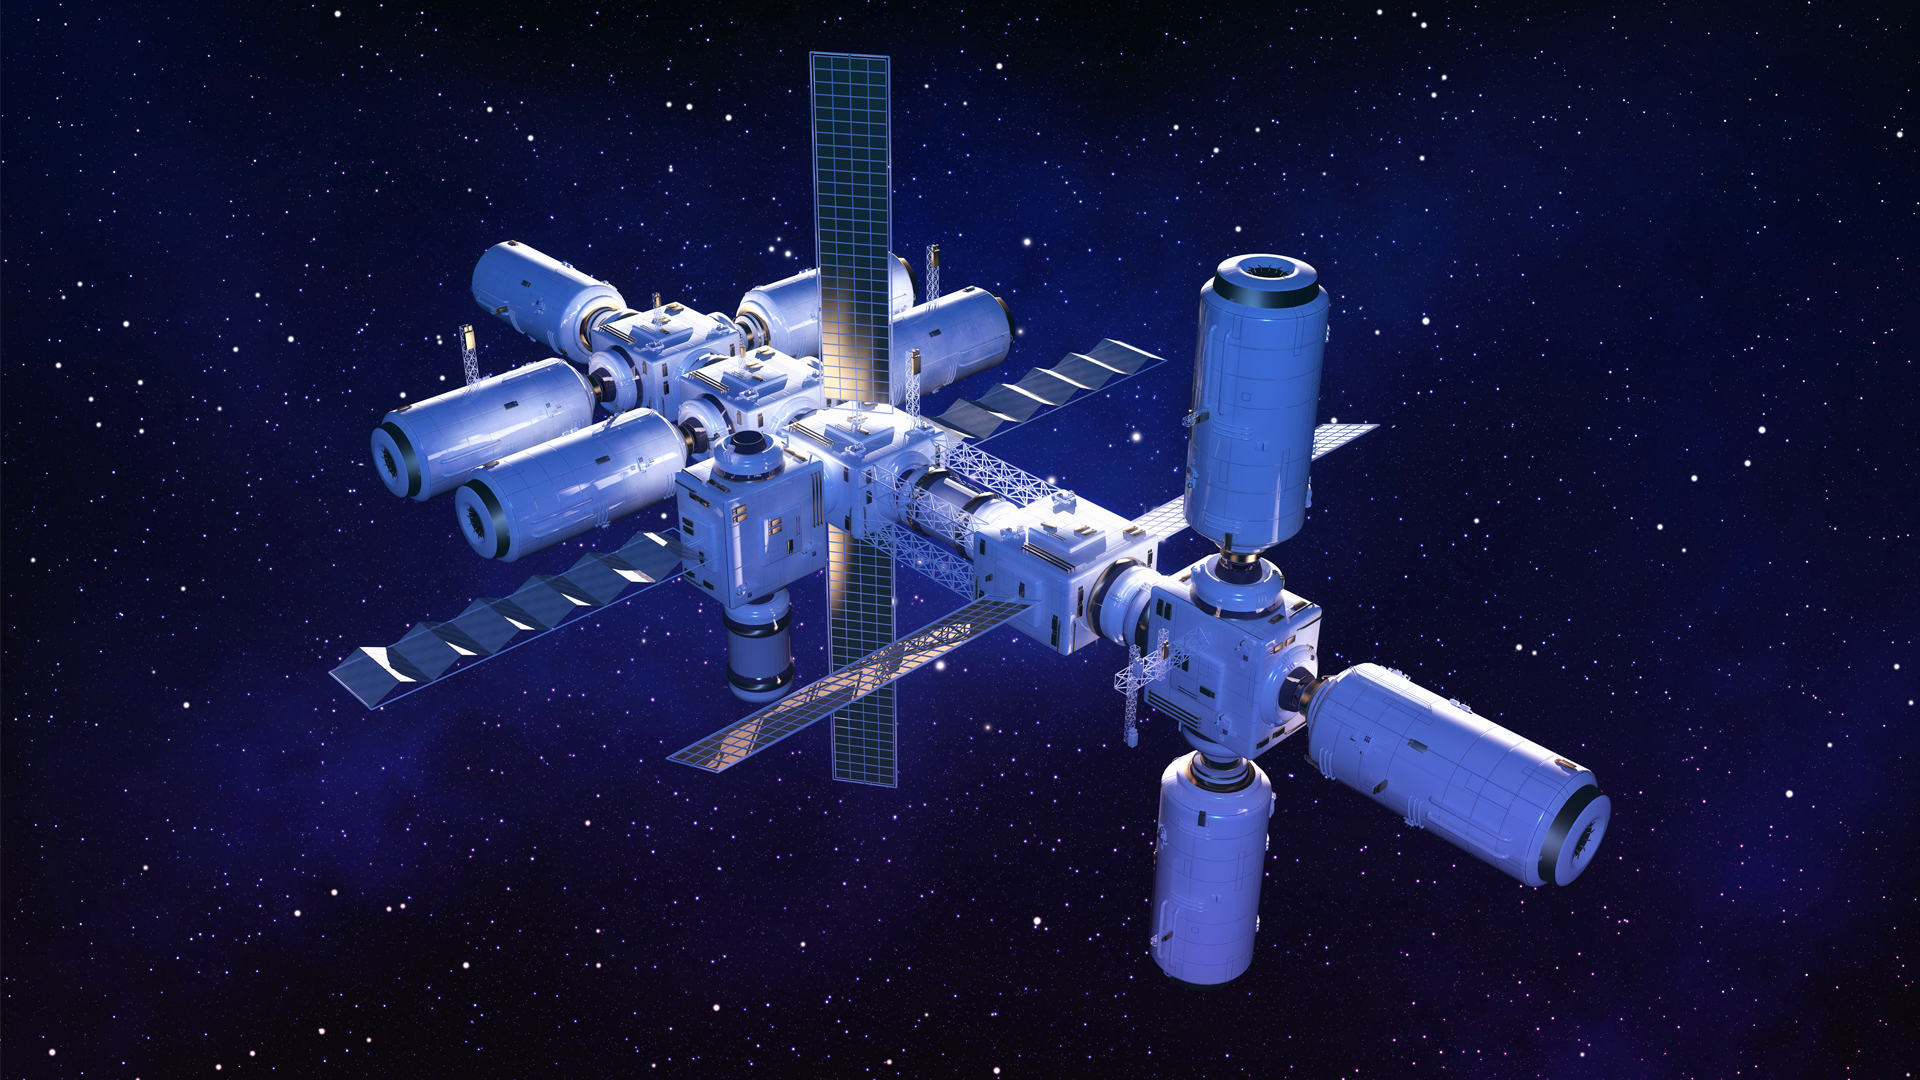 Axiom Space gains permission to build a commercial space station